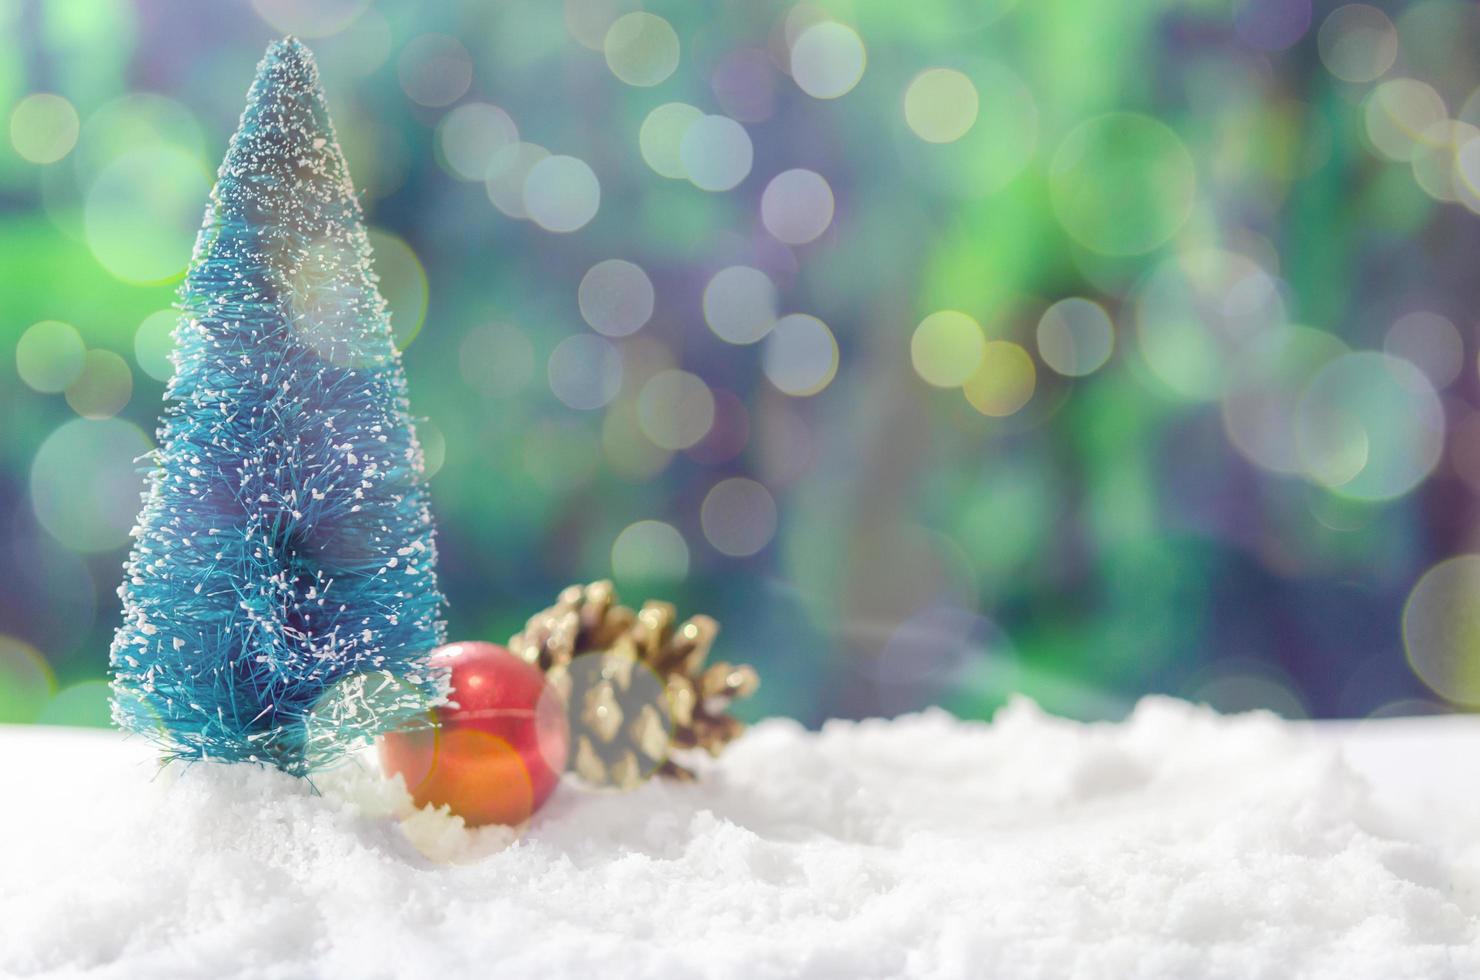 Miniature Christmas trees and decorations in the snow photo